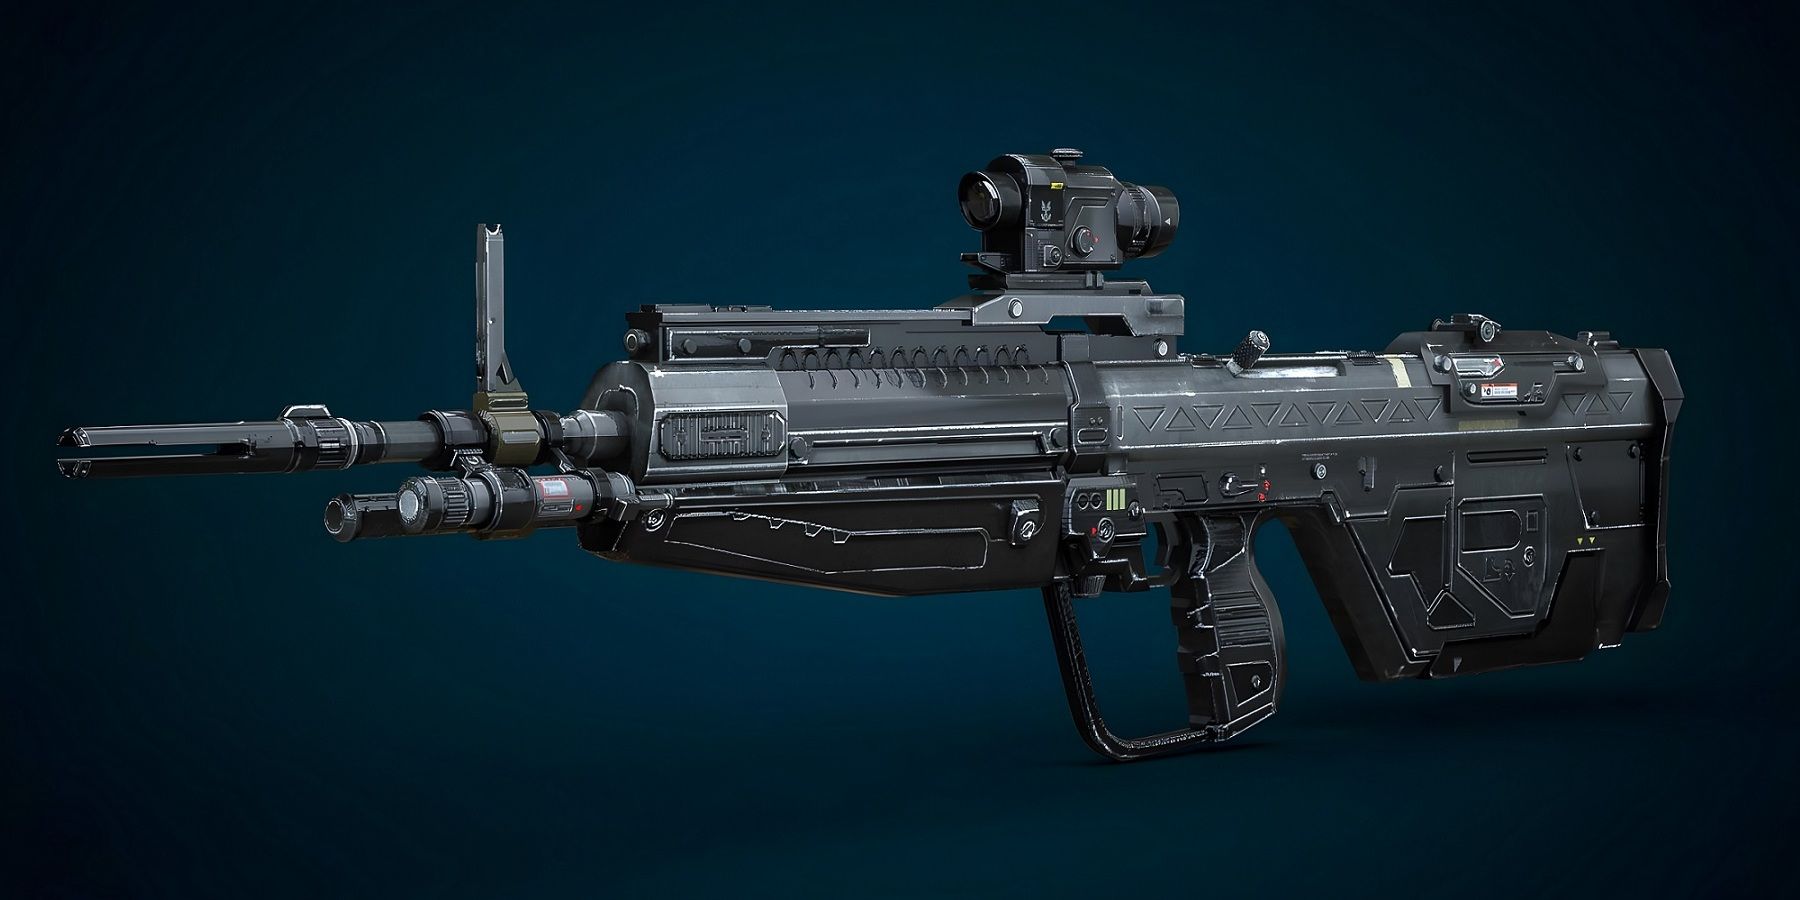 Halo-Franchise-DMR-Scout-Rifle-Official-Image